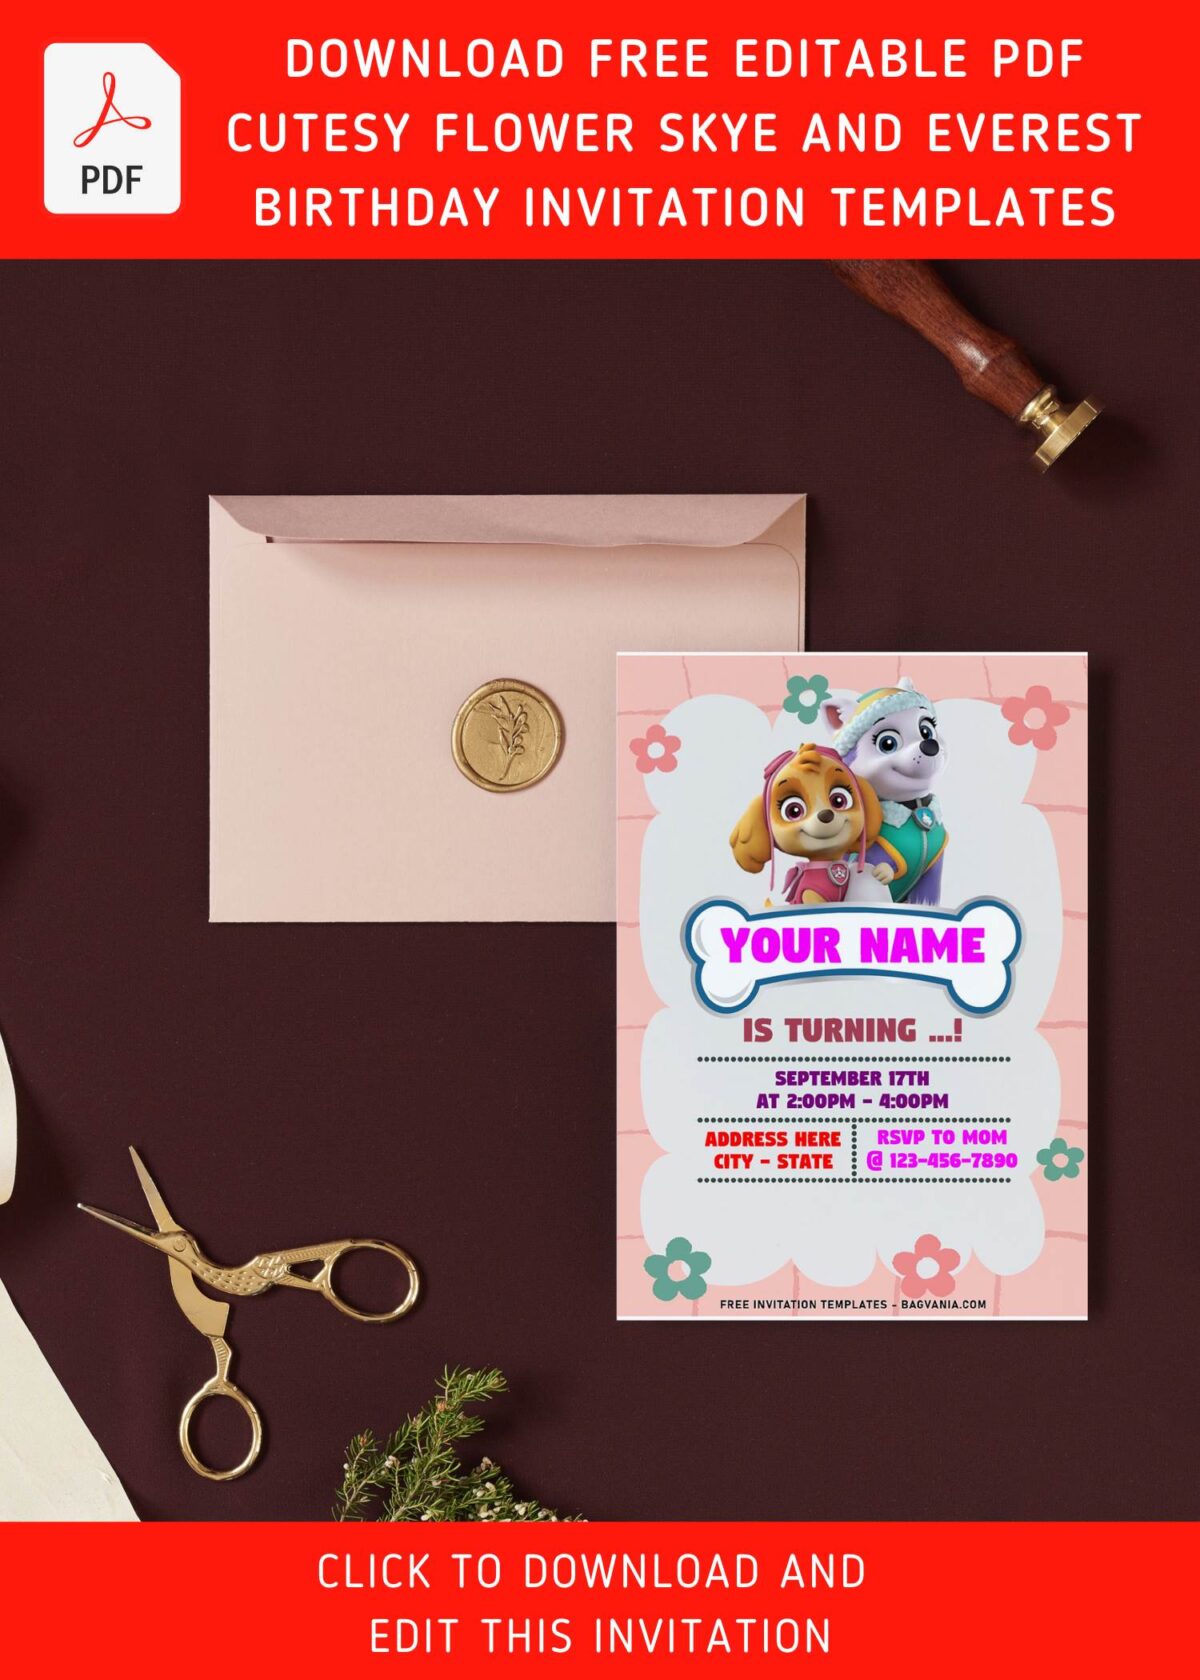 (Free Editable PDF) Quirky Cute Skye And Everest PAW Patrol Birthday Invitation Templates with editable text